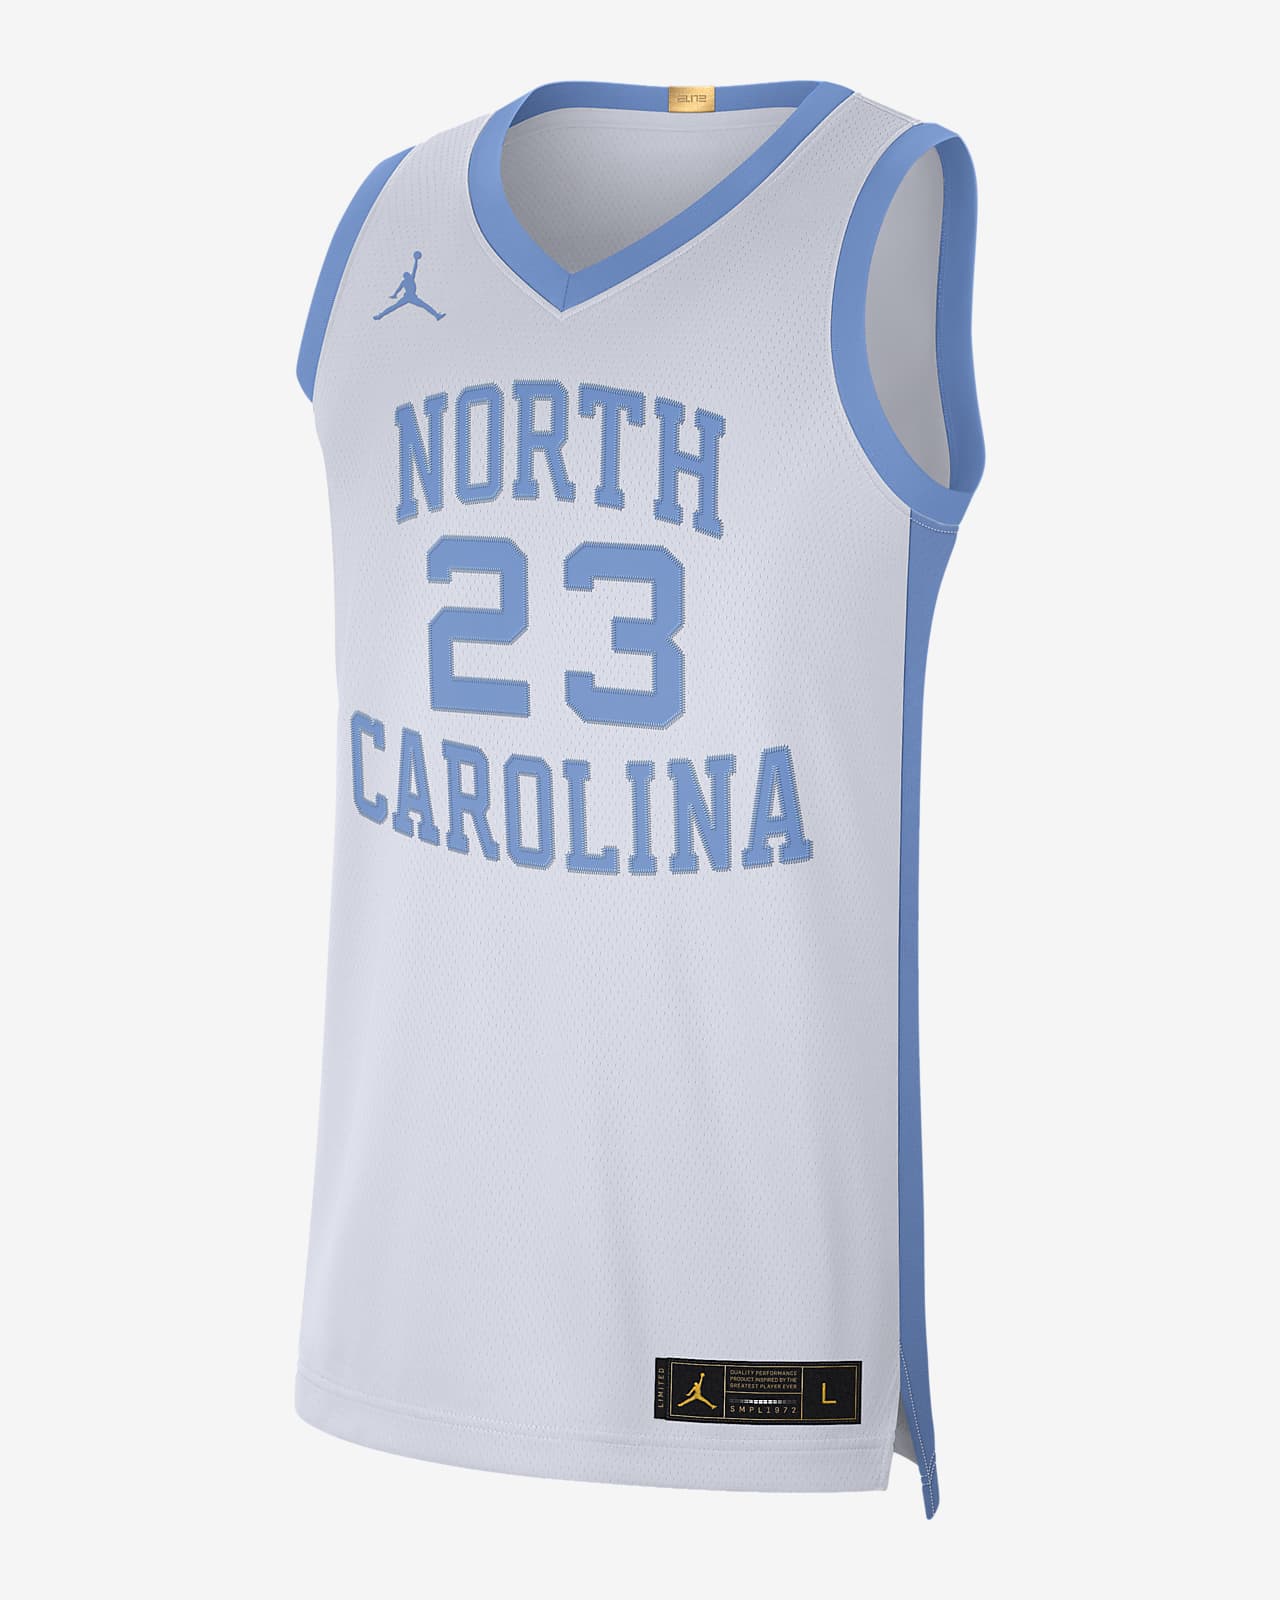 UNC Limited Men's Dri-FIT College Basketball Jersey. Nike.com